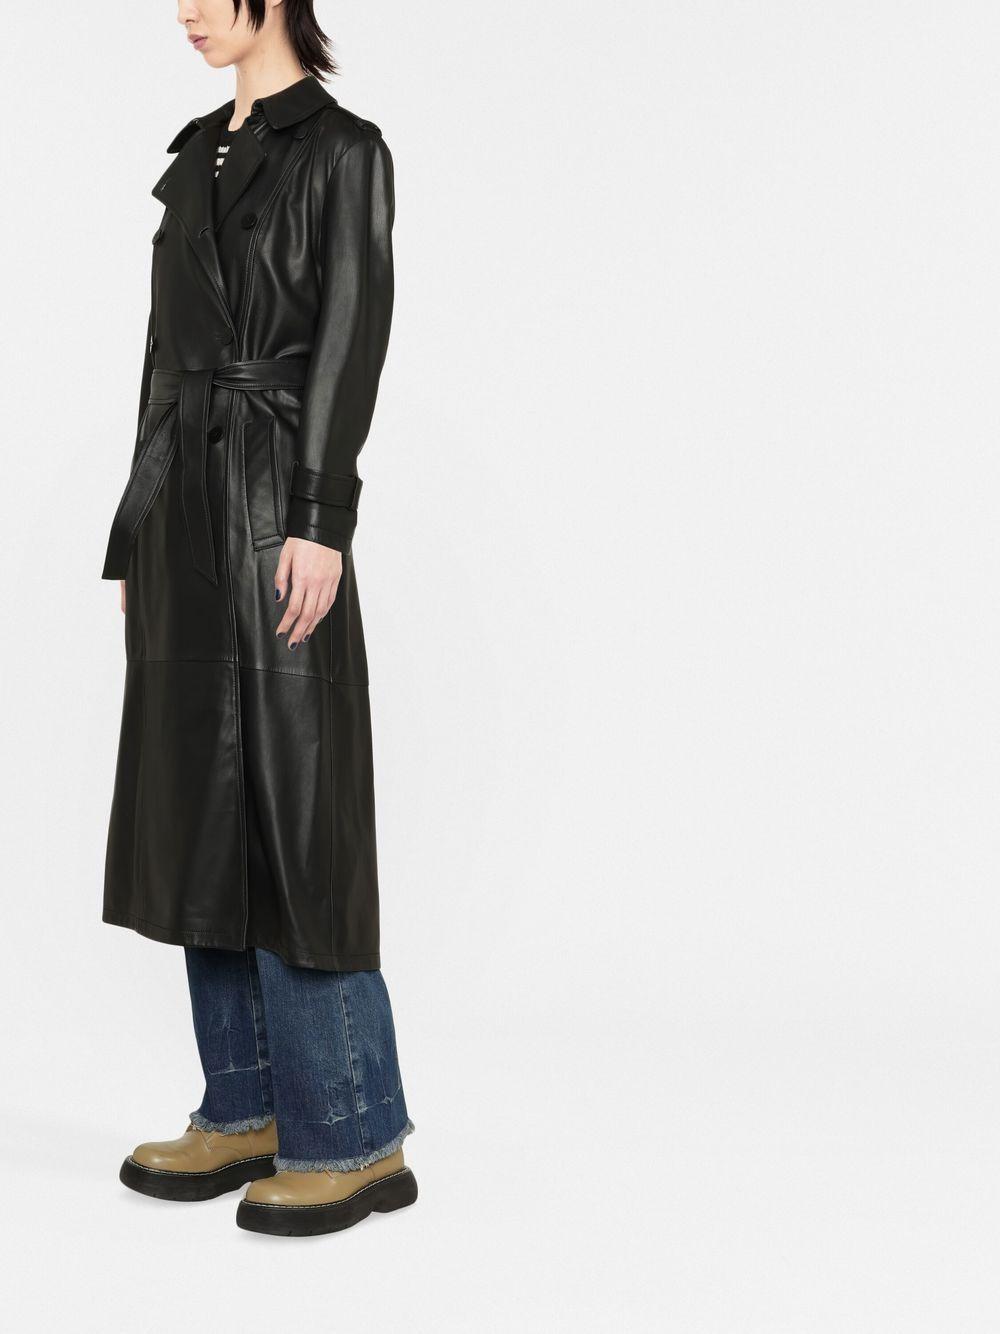 Save 36% Womens Clothing Coats Raincoats and trench coats Emporio Armani Double-breasted Leather Trench Coat in Black 